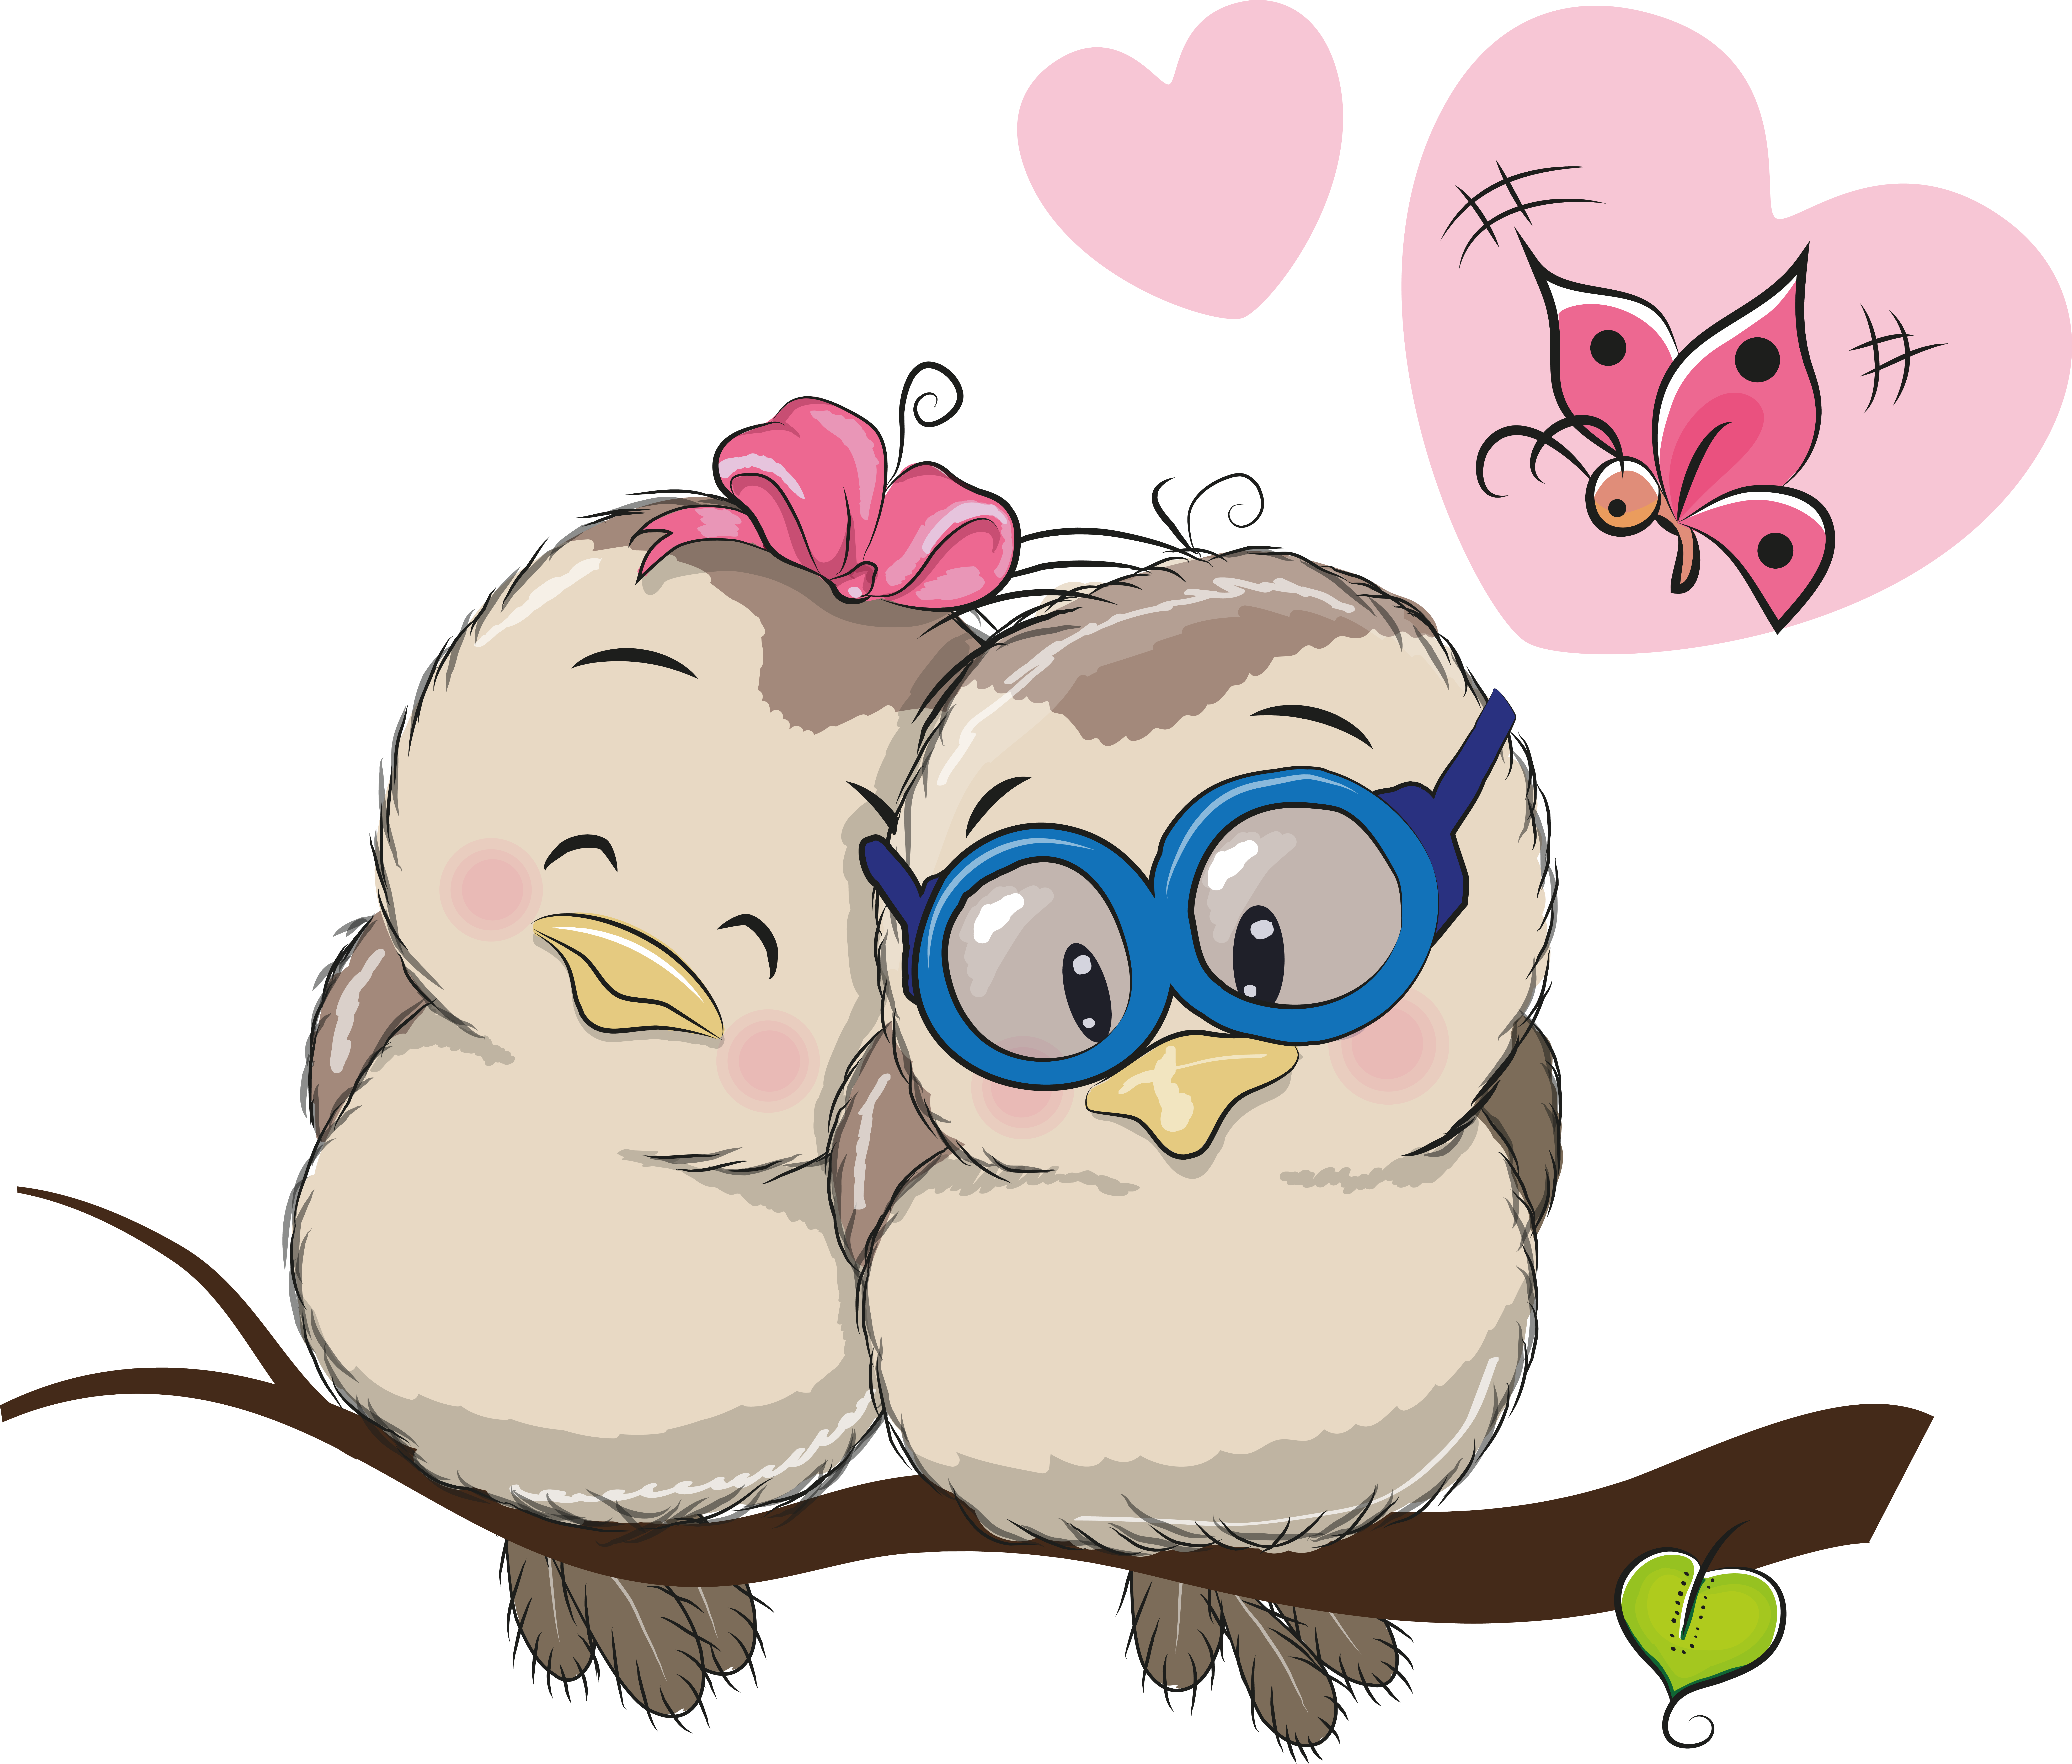 Love Cartoon Birds PNG Image High Quality Clipart